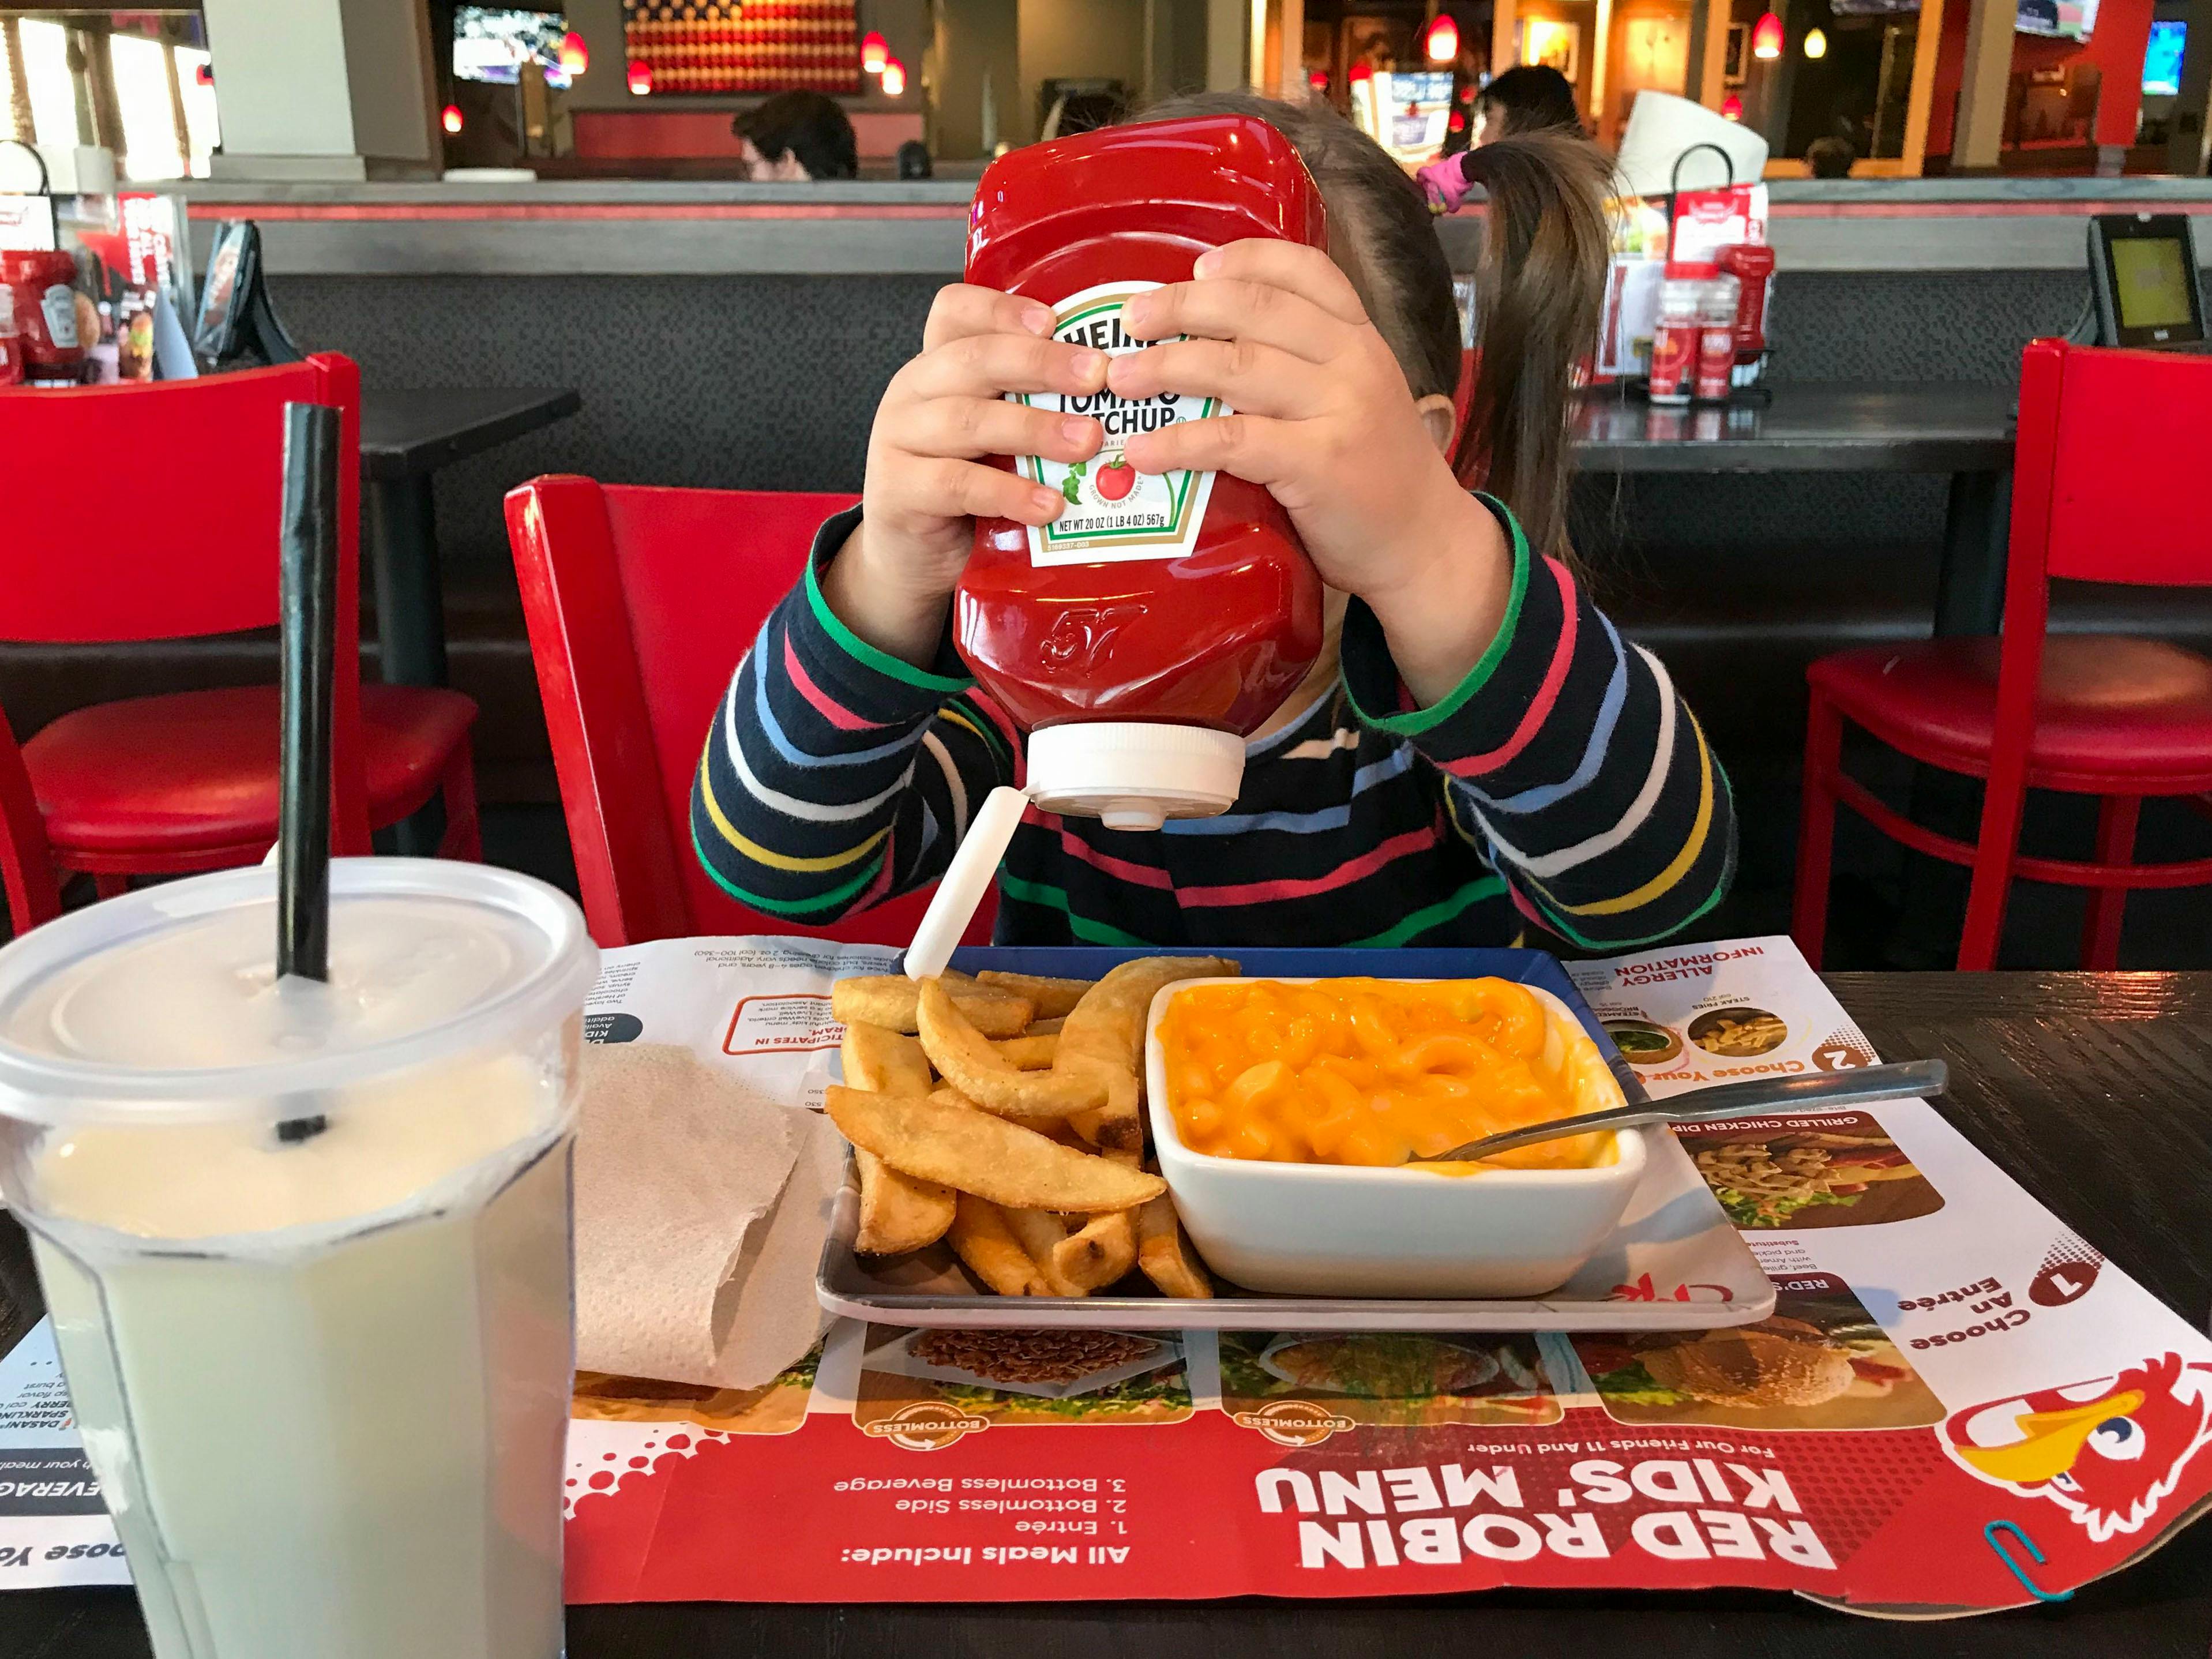 A child squeezing a bottle of Heinz ketchup onto a plate of fries and mac and cheese in front of her at a booth at Red Robin.